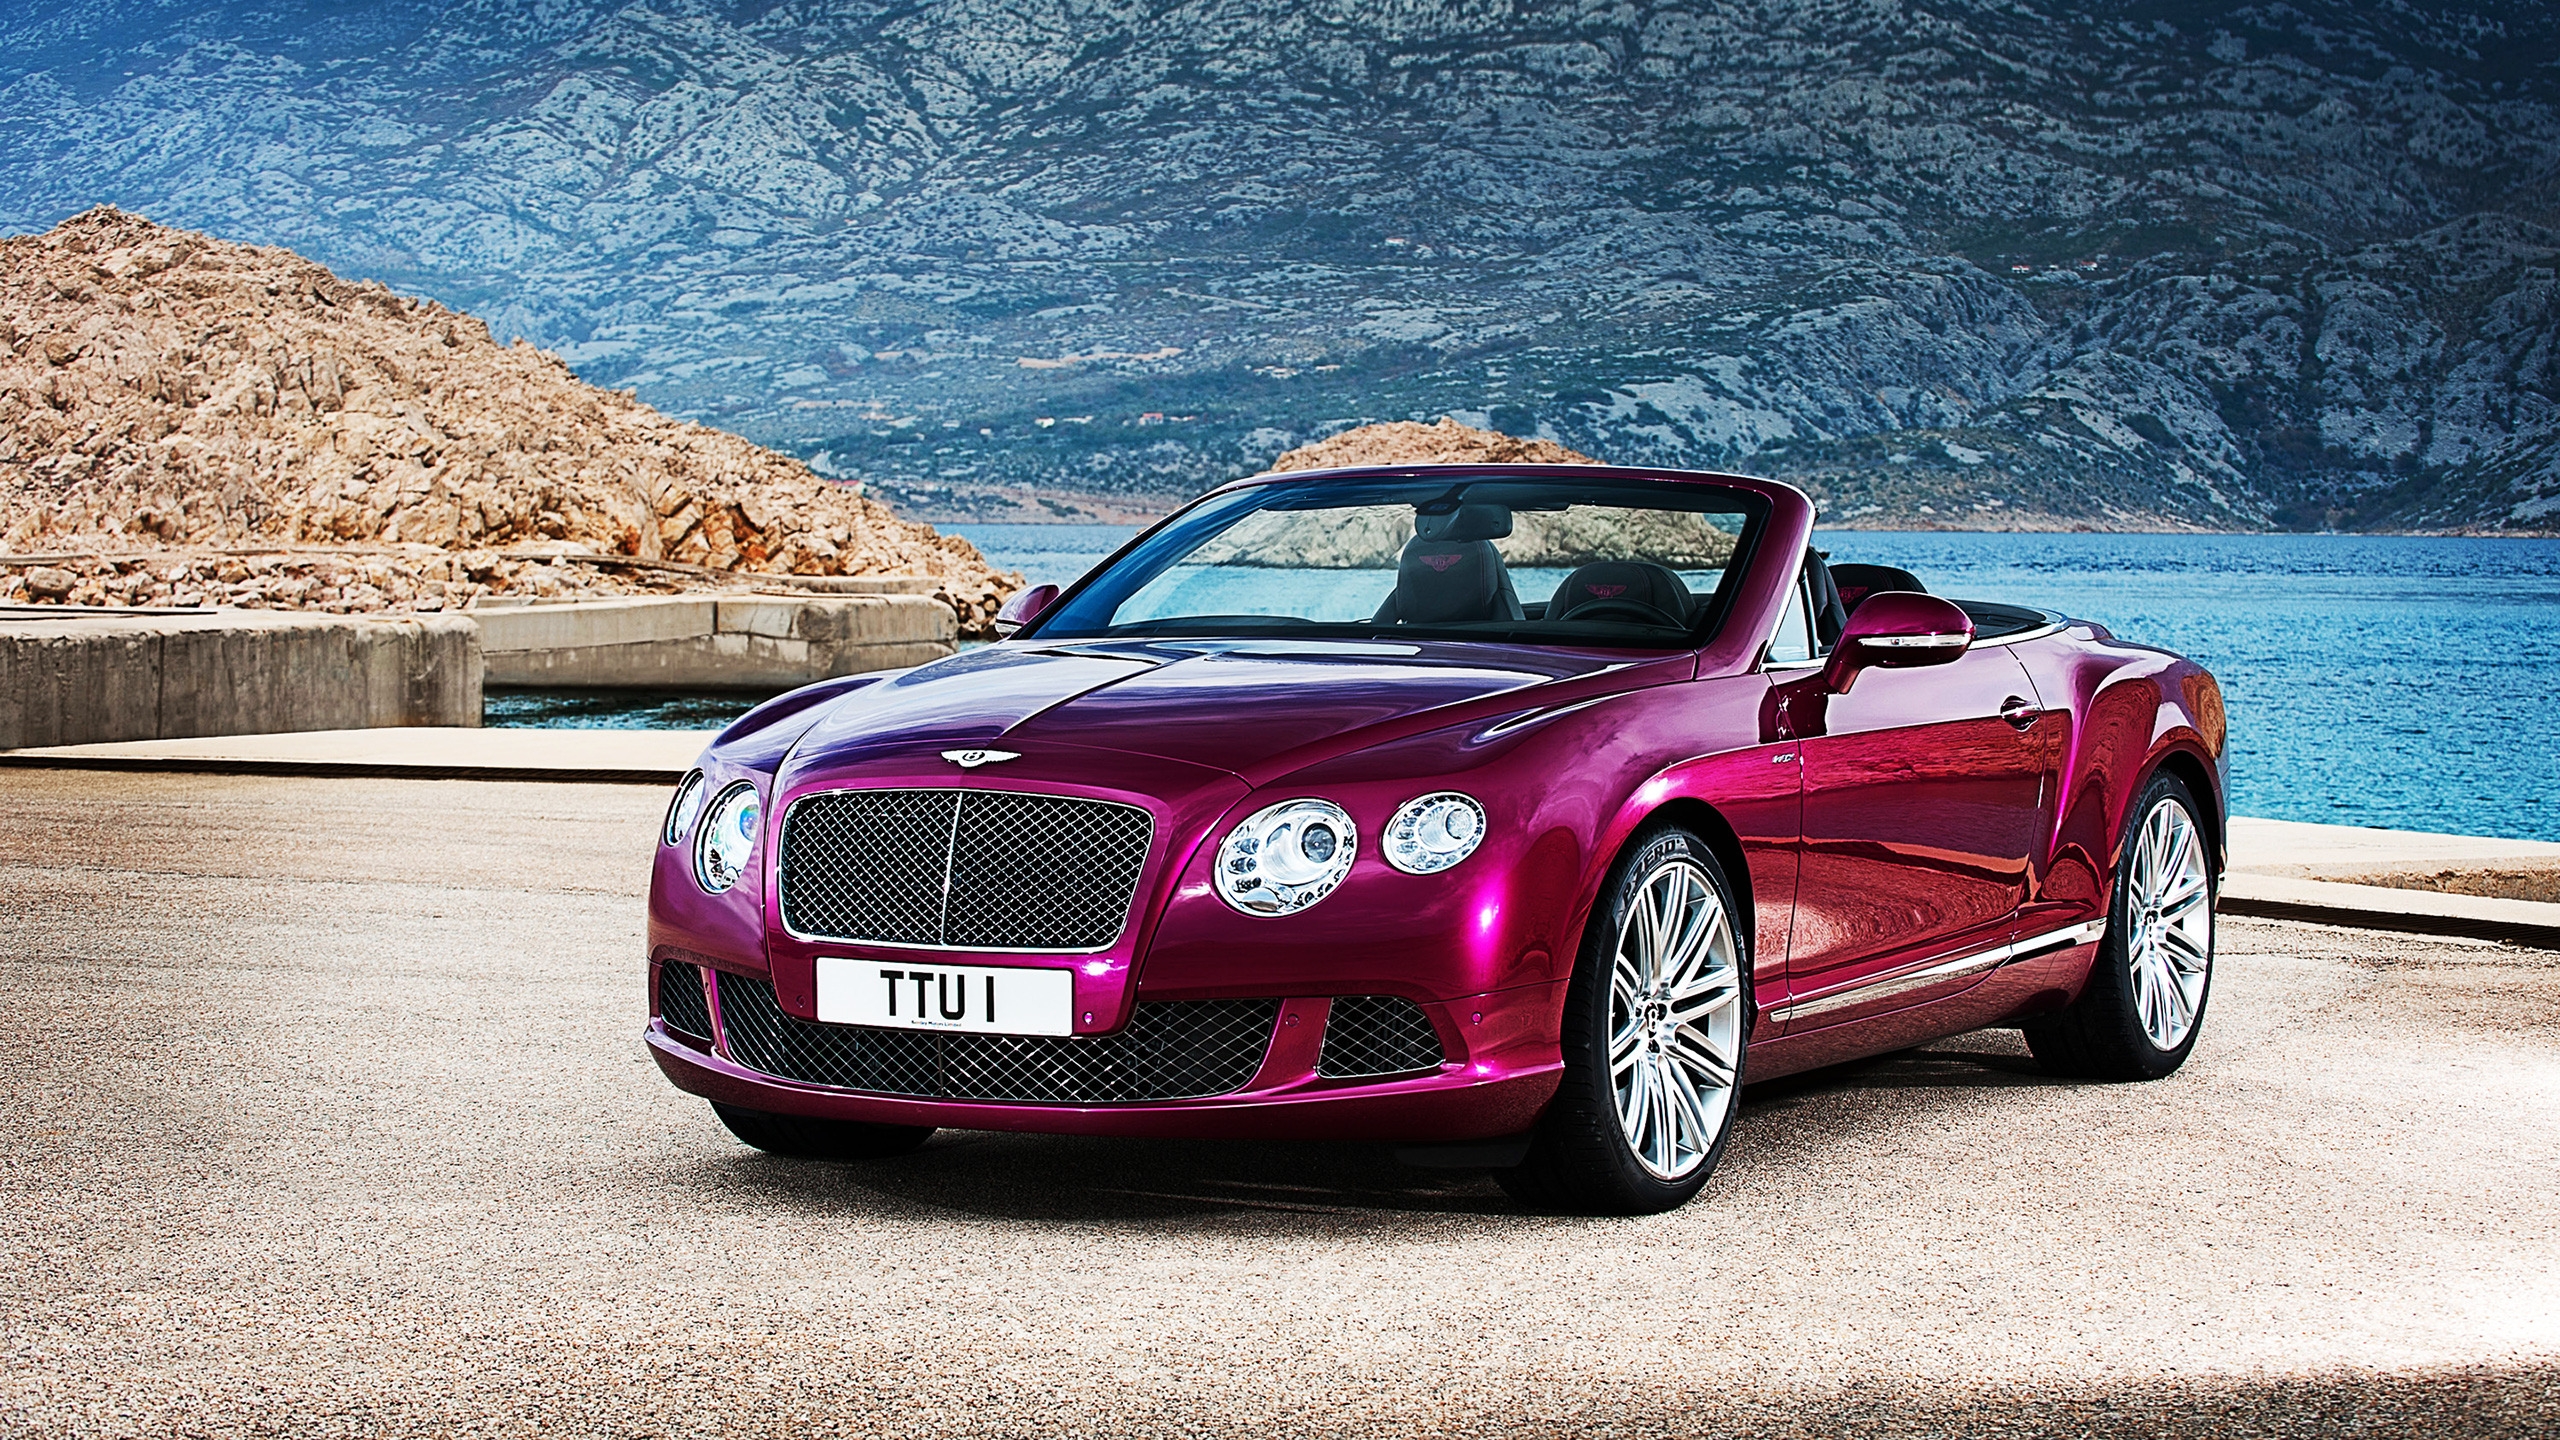 Bentley Continental GT Convertible 2013 for 2560x1440 HDTV resolution